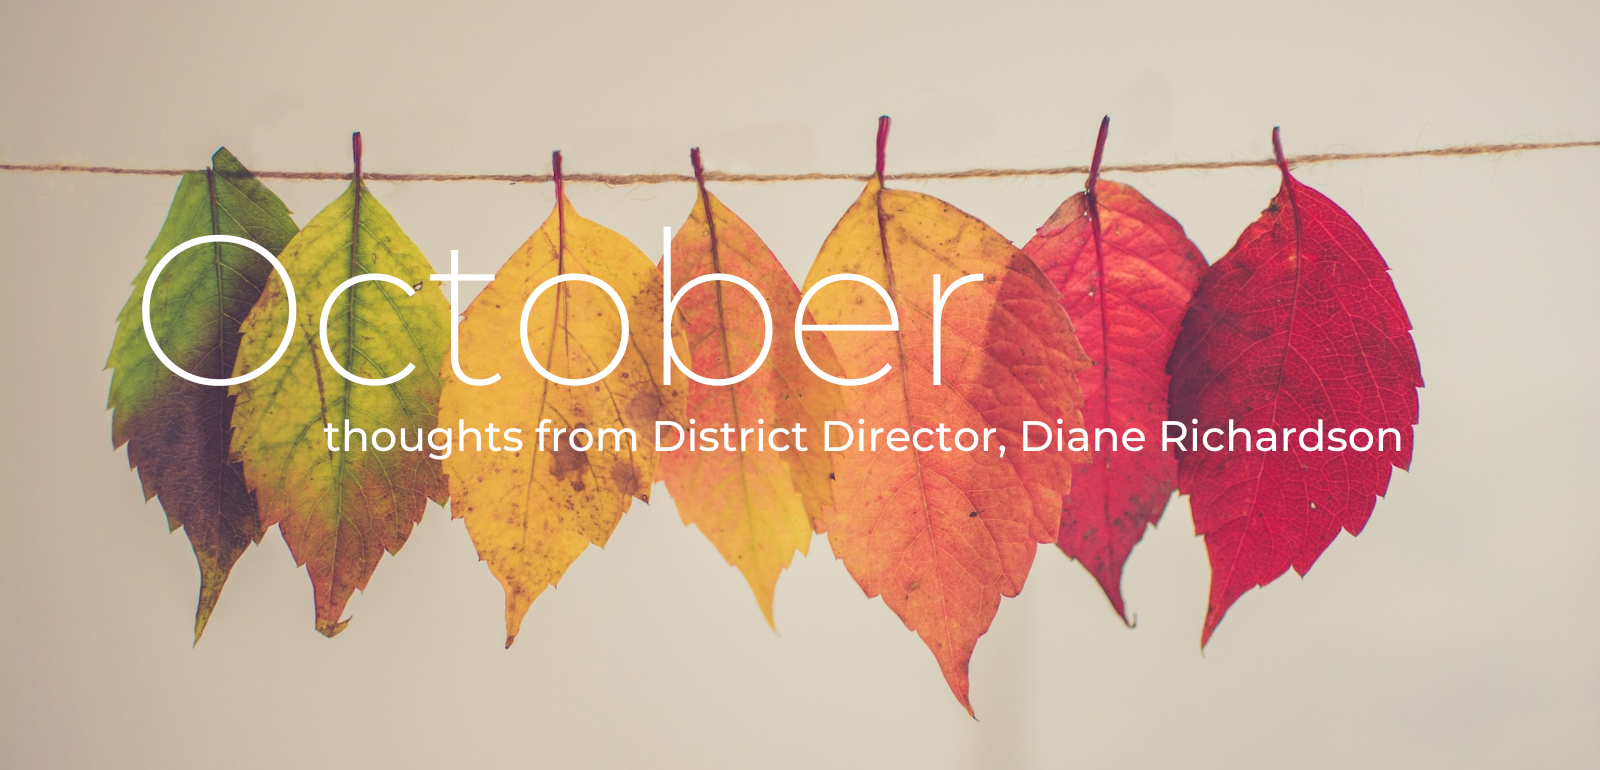 October thoughts from District Director, Diane Richardson